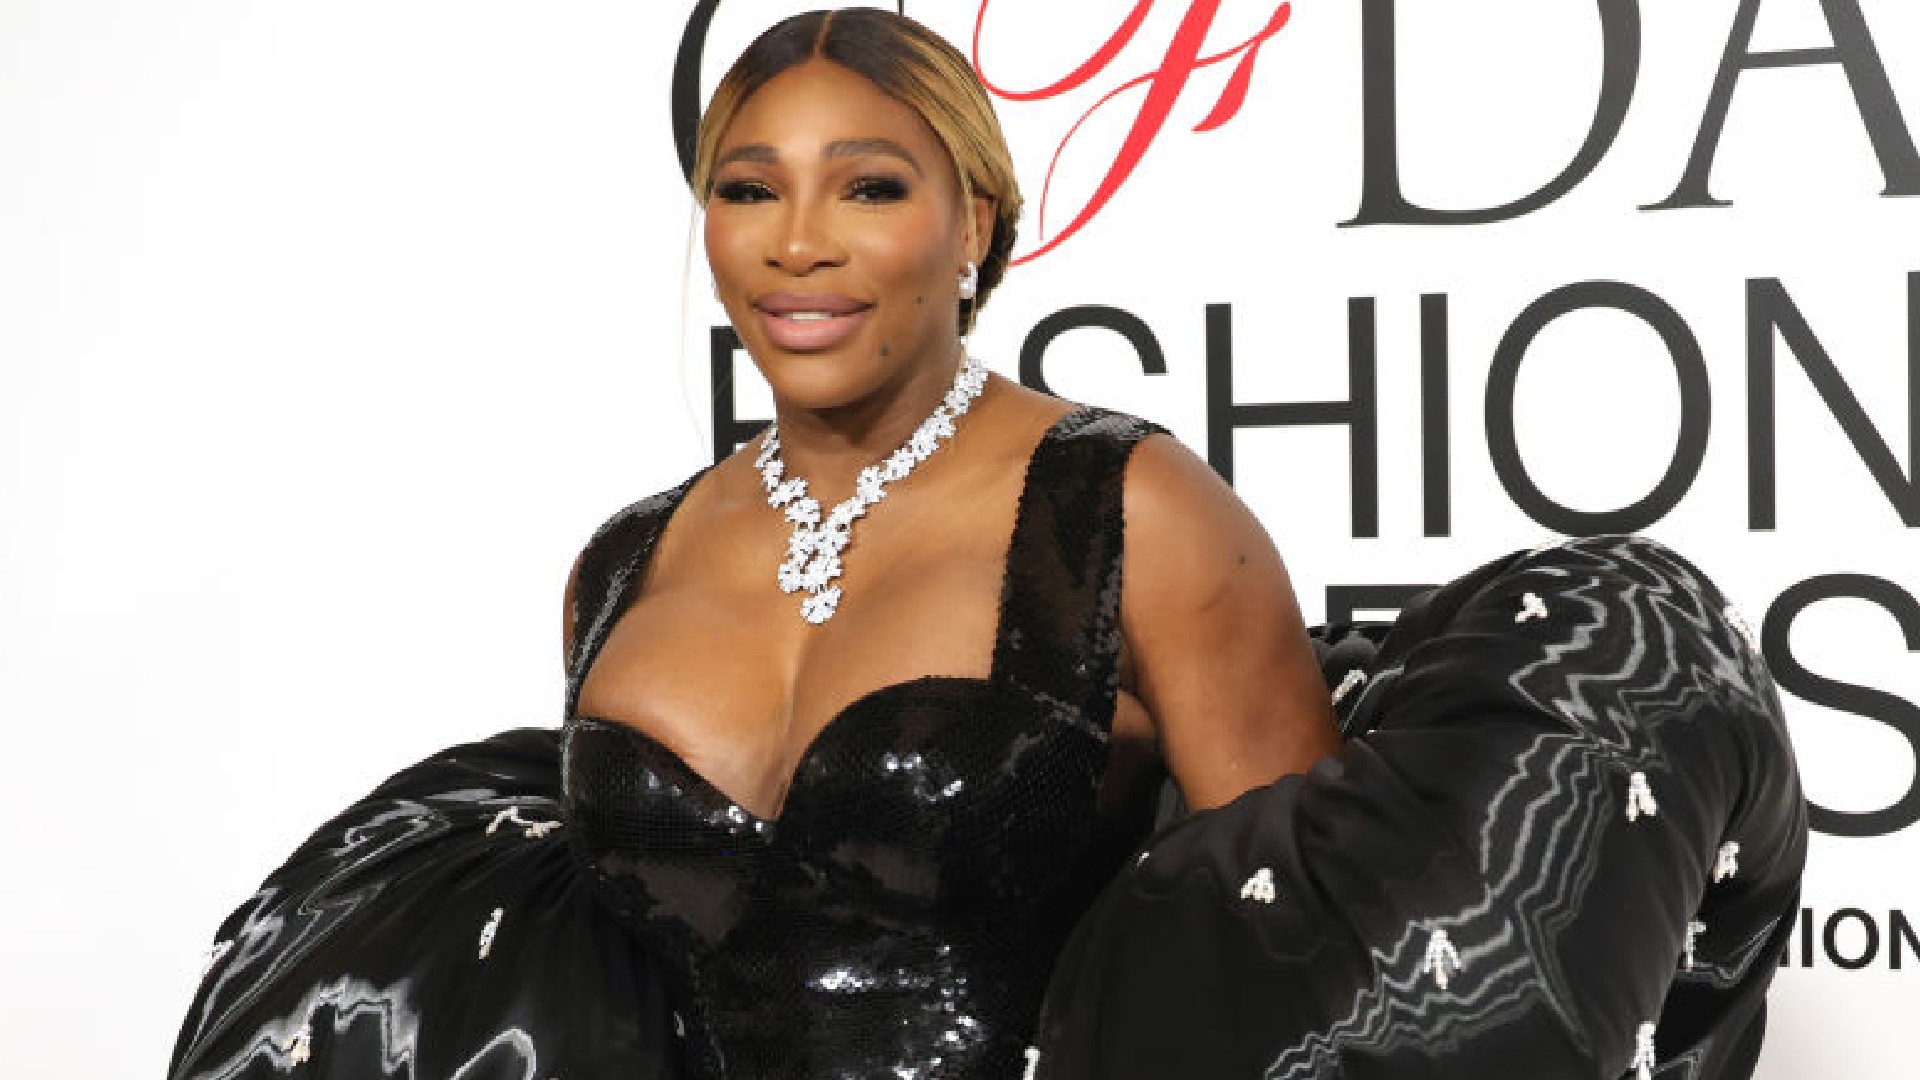 Super Soldier Milk- Serena Williams Says She's Donating Her Breast Milk To Help A Mom In Need